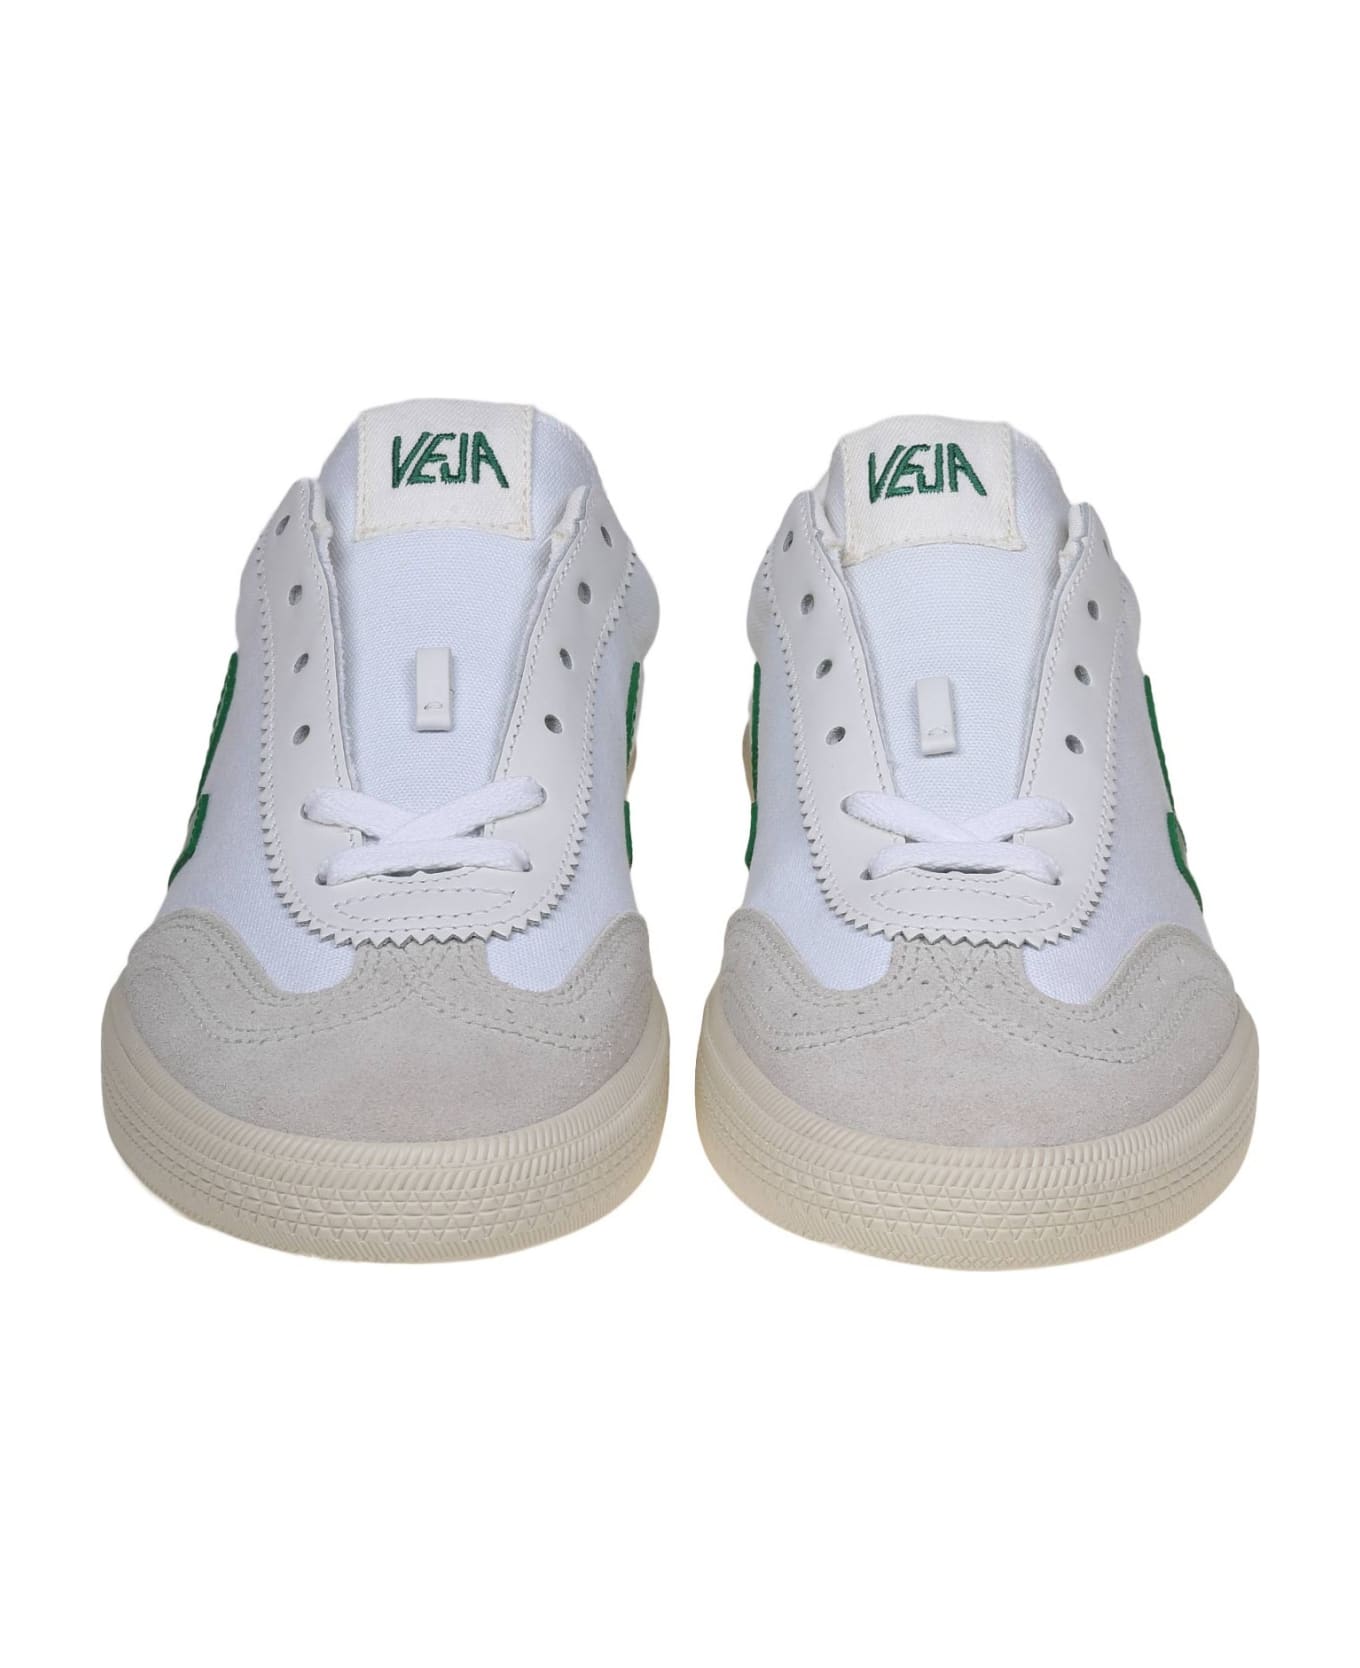 Veja Volley Sneakers In Canvas Color White/green - White/emeraude 